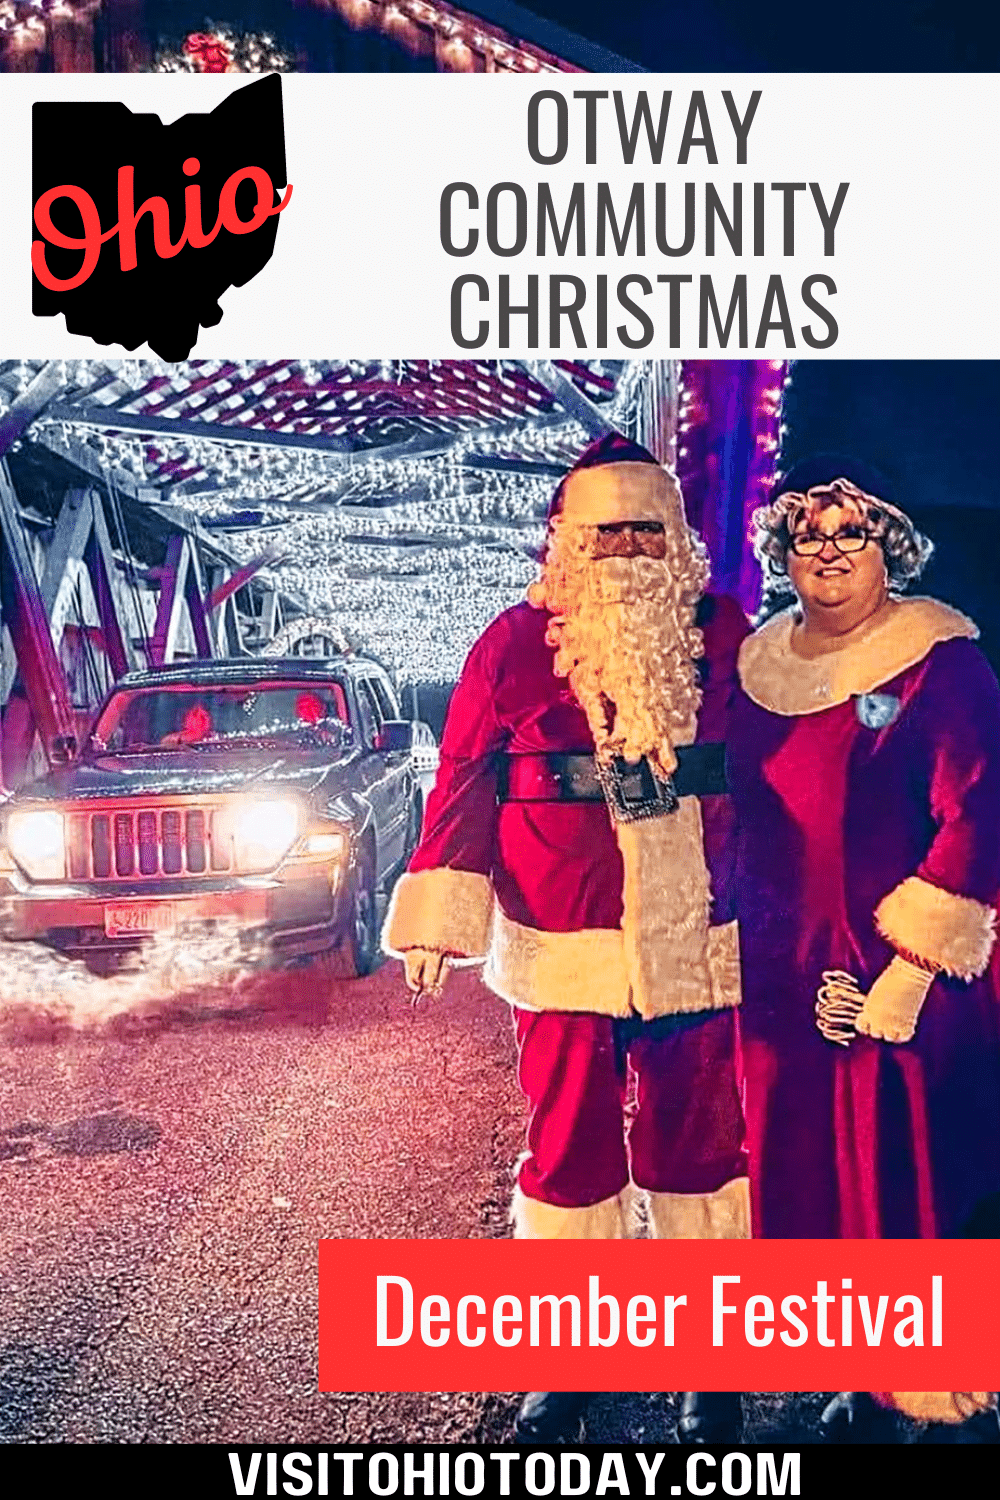 Otway Community Christmas is a one day festival in early December. Drive through the illuminated covered bridge and enjoy Redbird Christmas in the Otway Community Center.